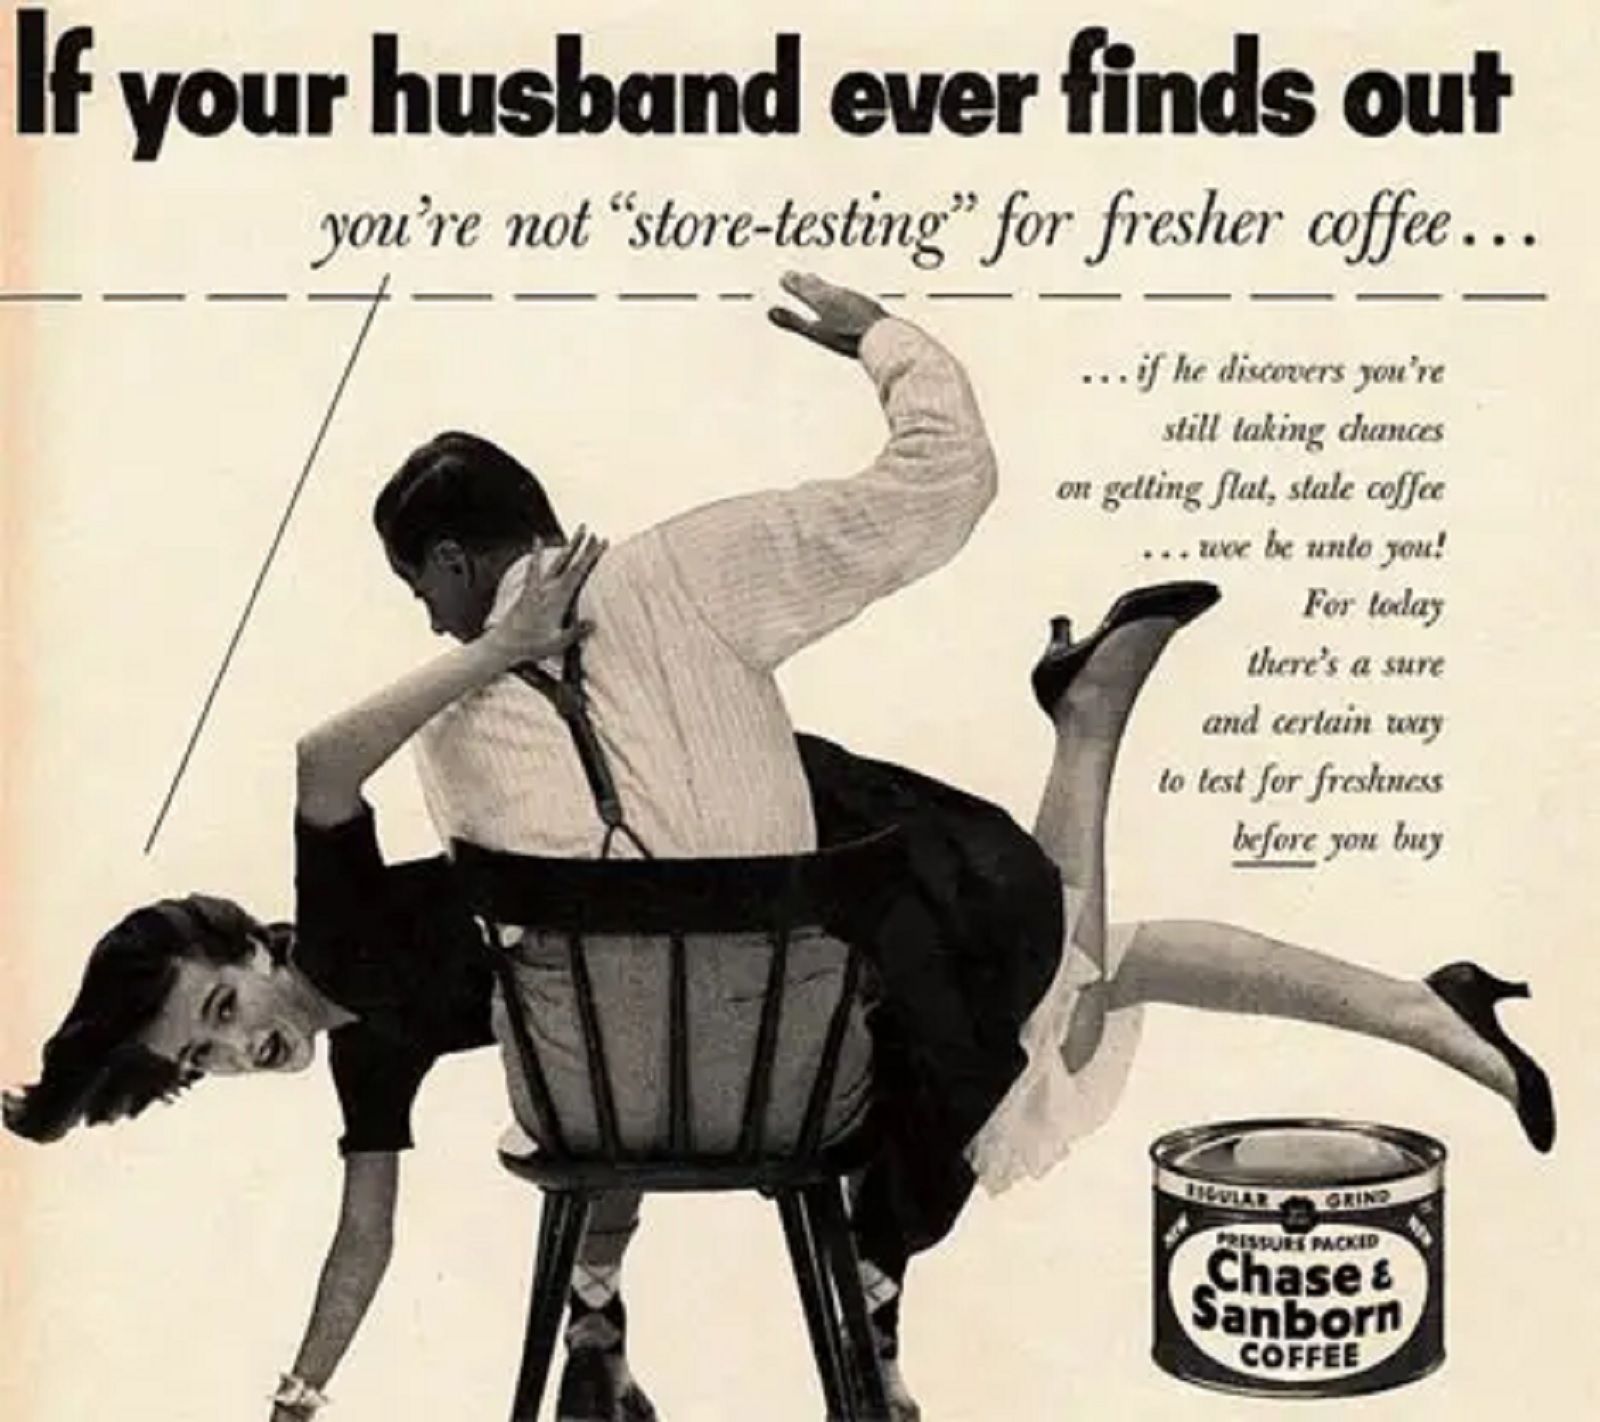 Some of the craziest adverts you're ever likely to see photo 11